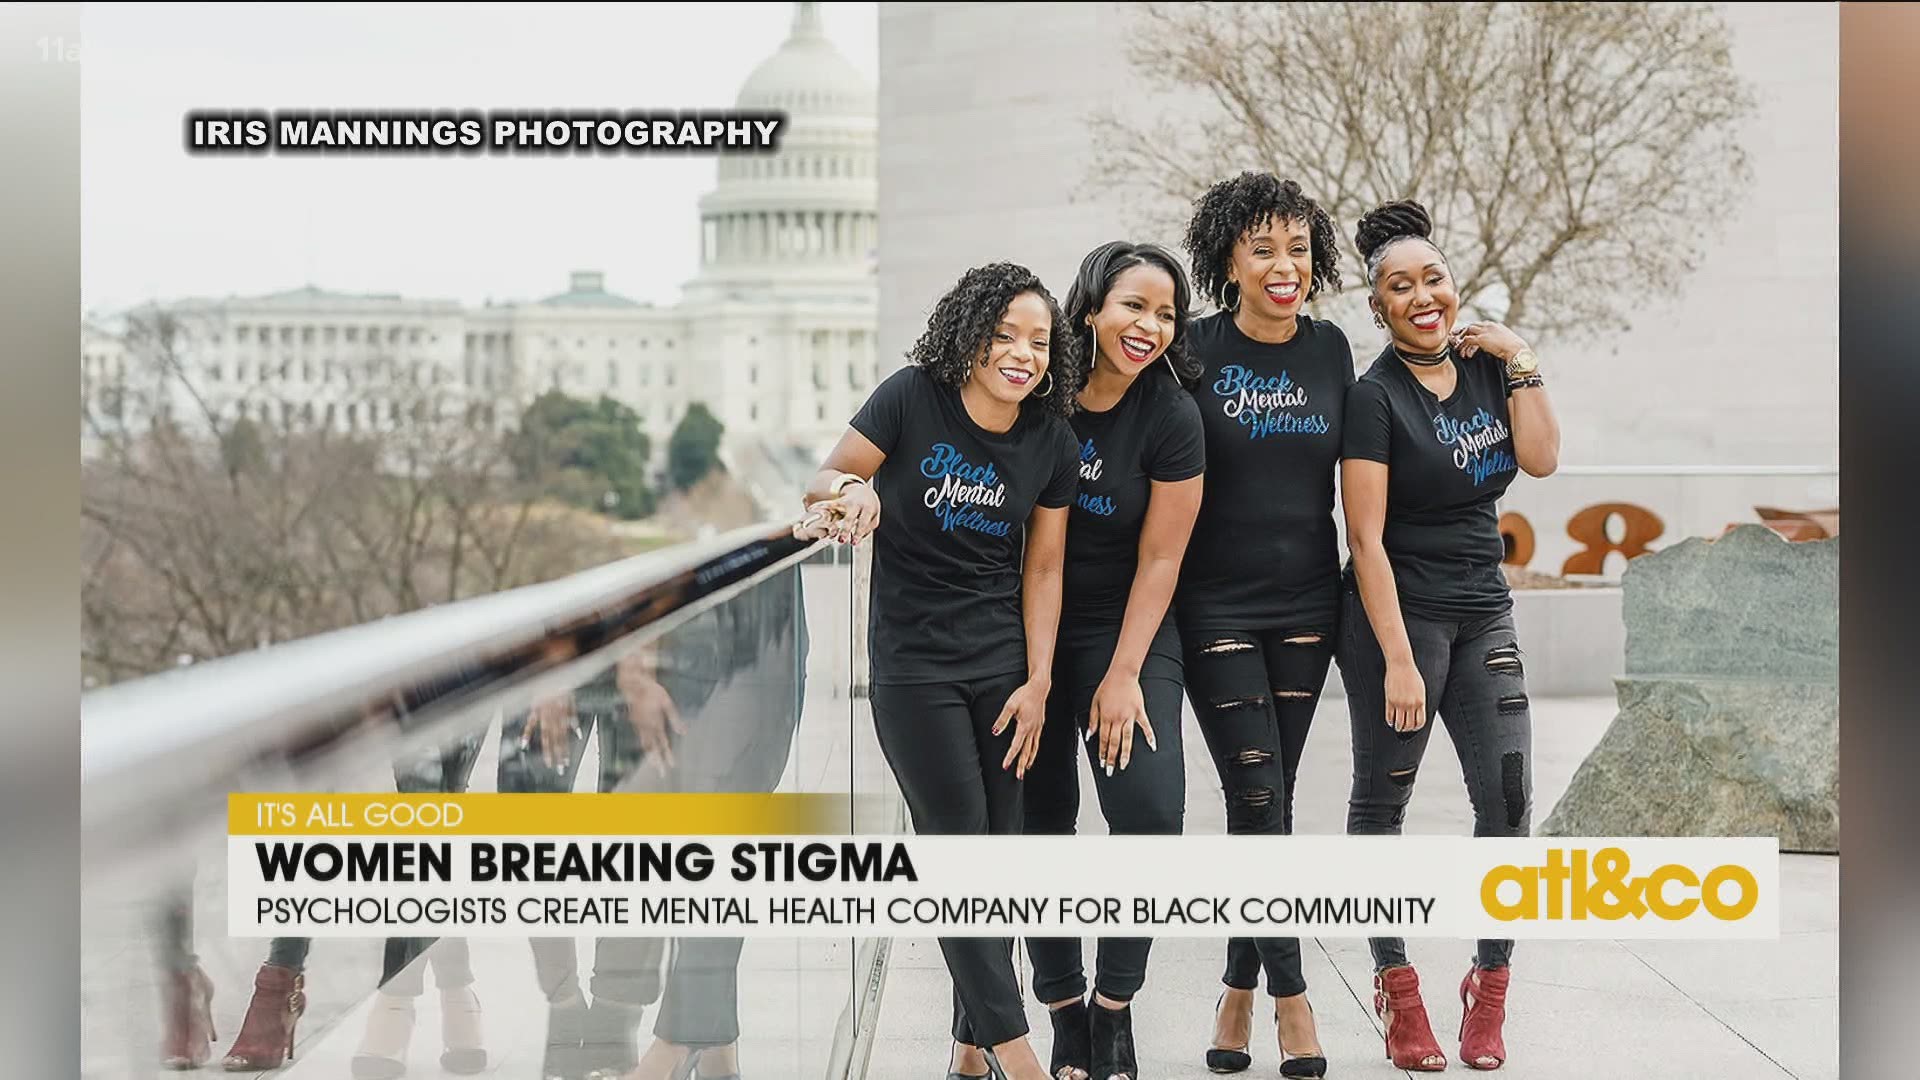 Learn about this inspiring campaign dedicated to encouraging open conversations surrounding mental health in the Black community.